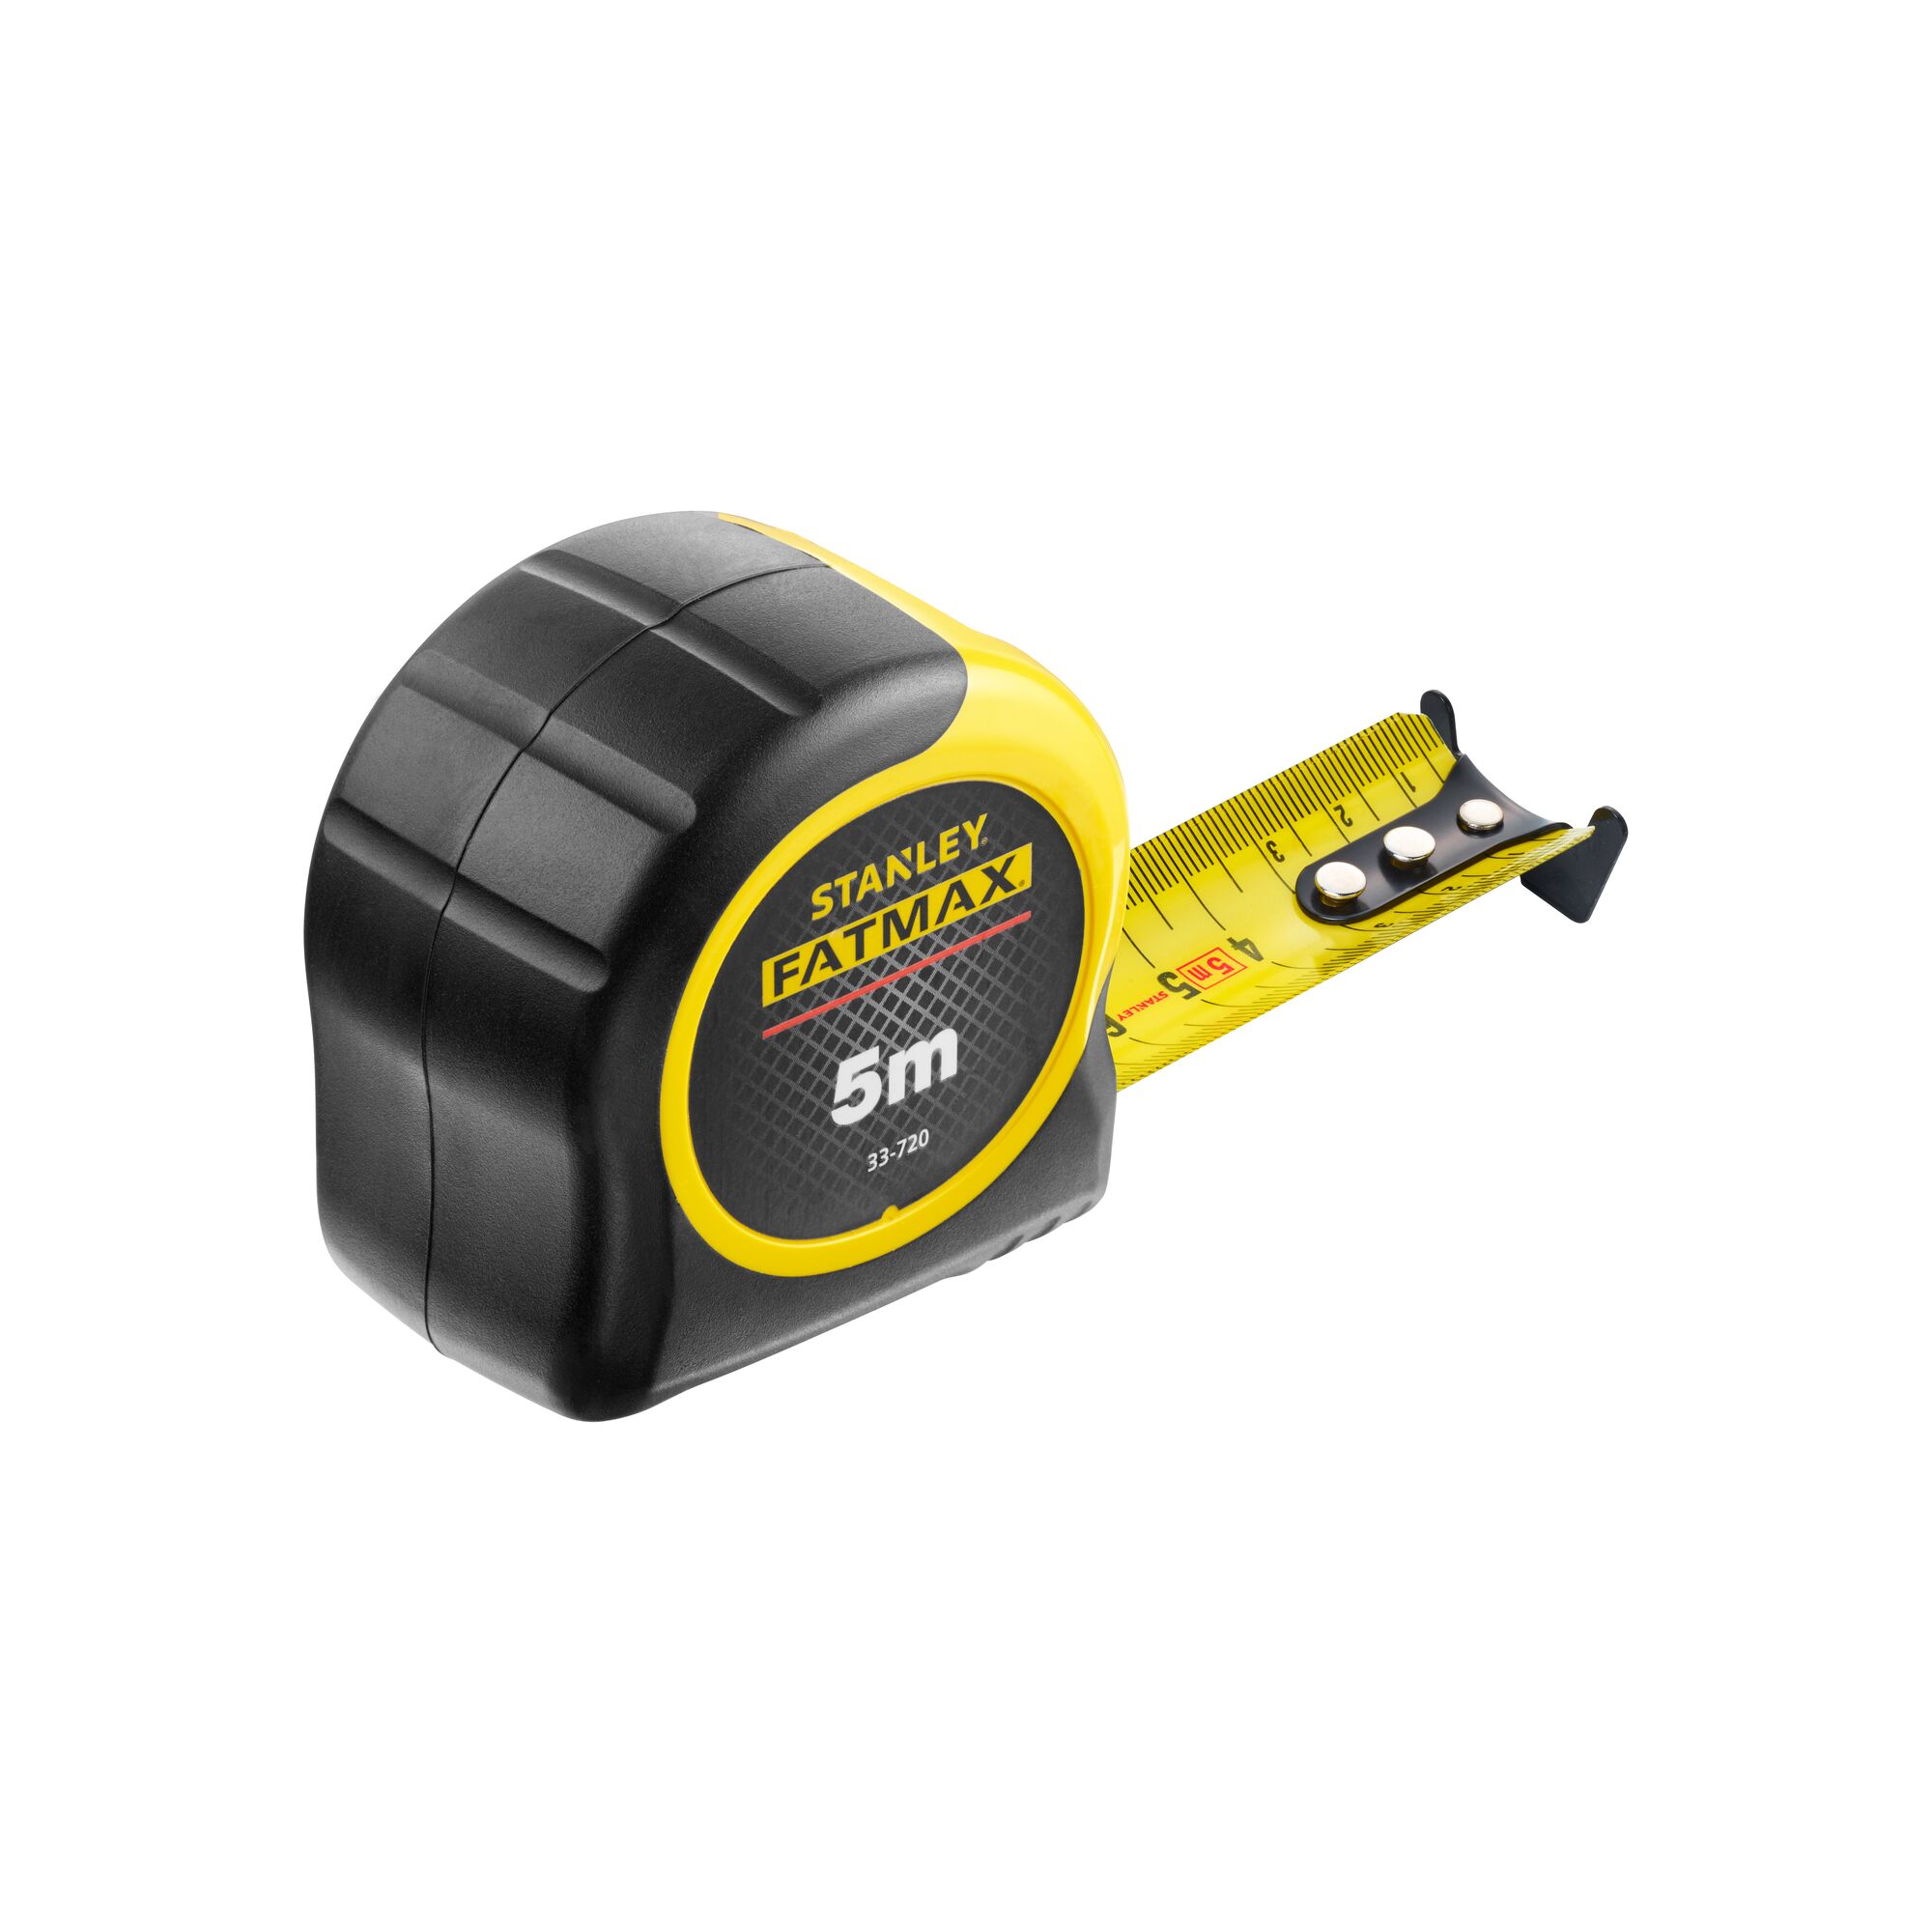 Stanley 0-33-720 Fatmax 2 x STA033720 5m Blade Armor Metric Only Tape Measures 